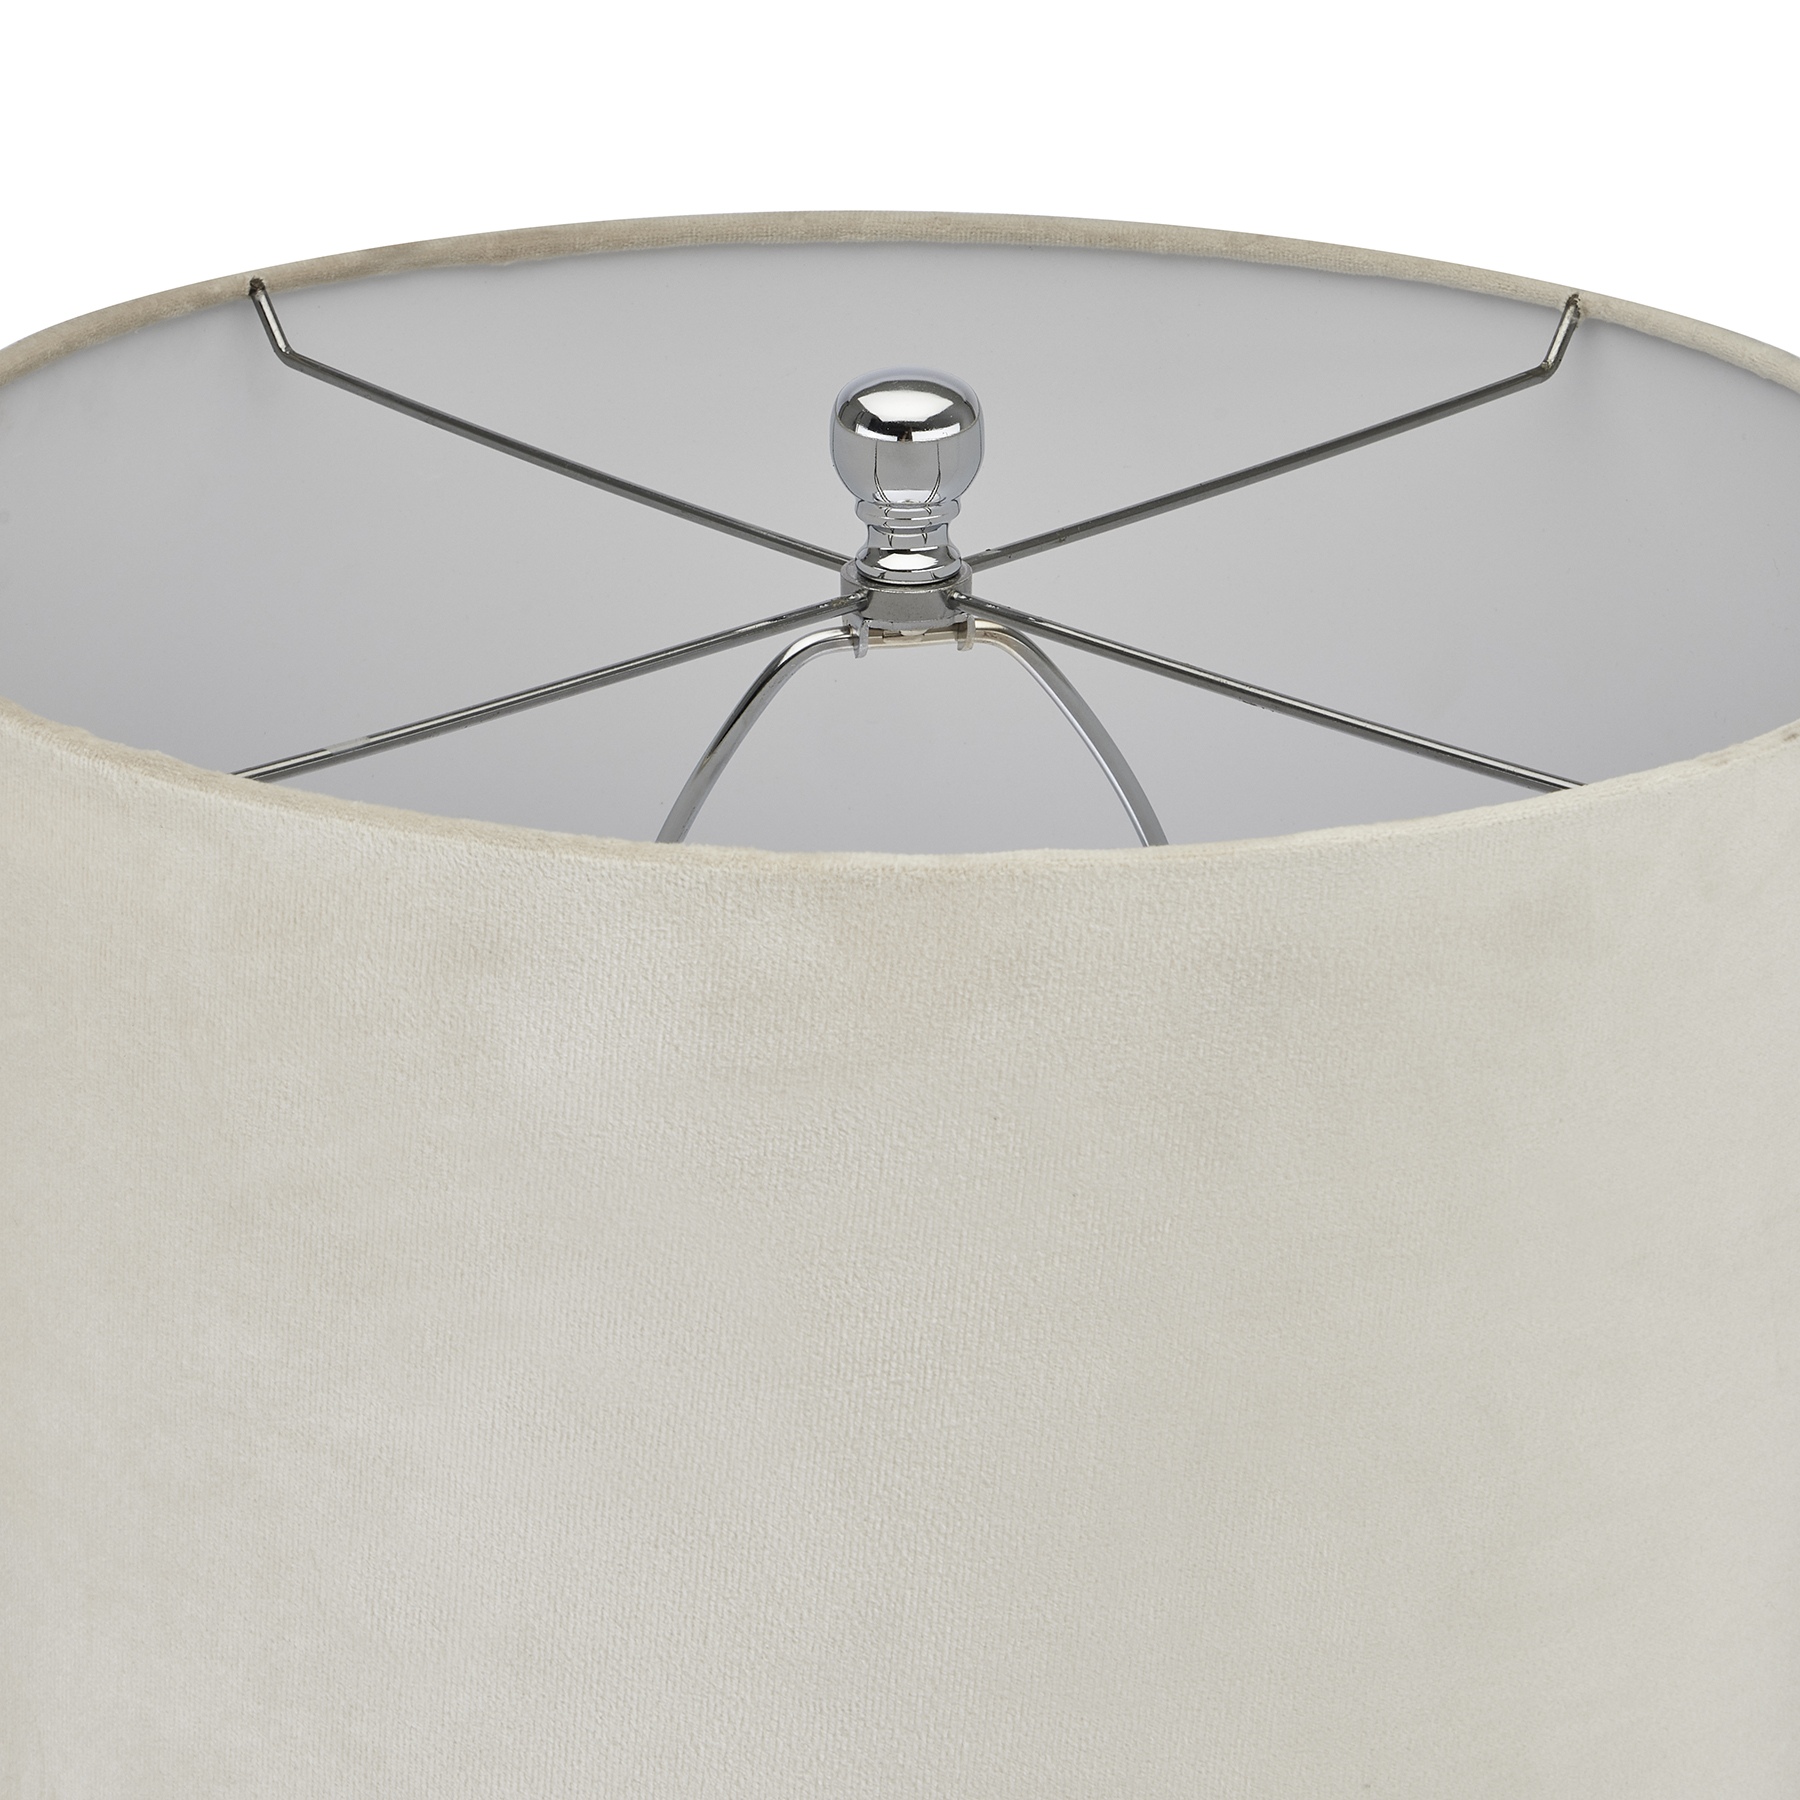 Justicia Metallic Glass Lamp With Velvet Shade - Image 2